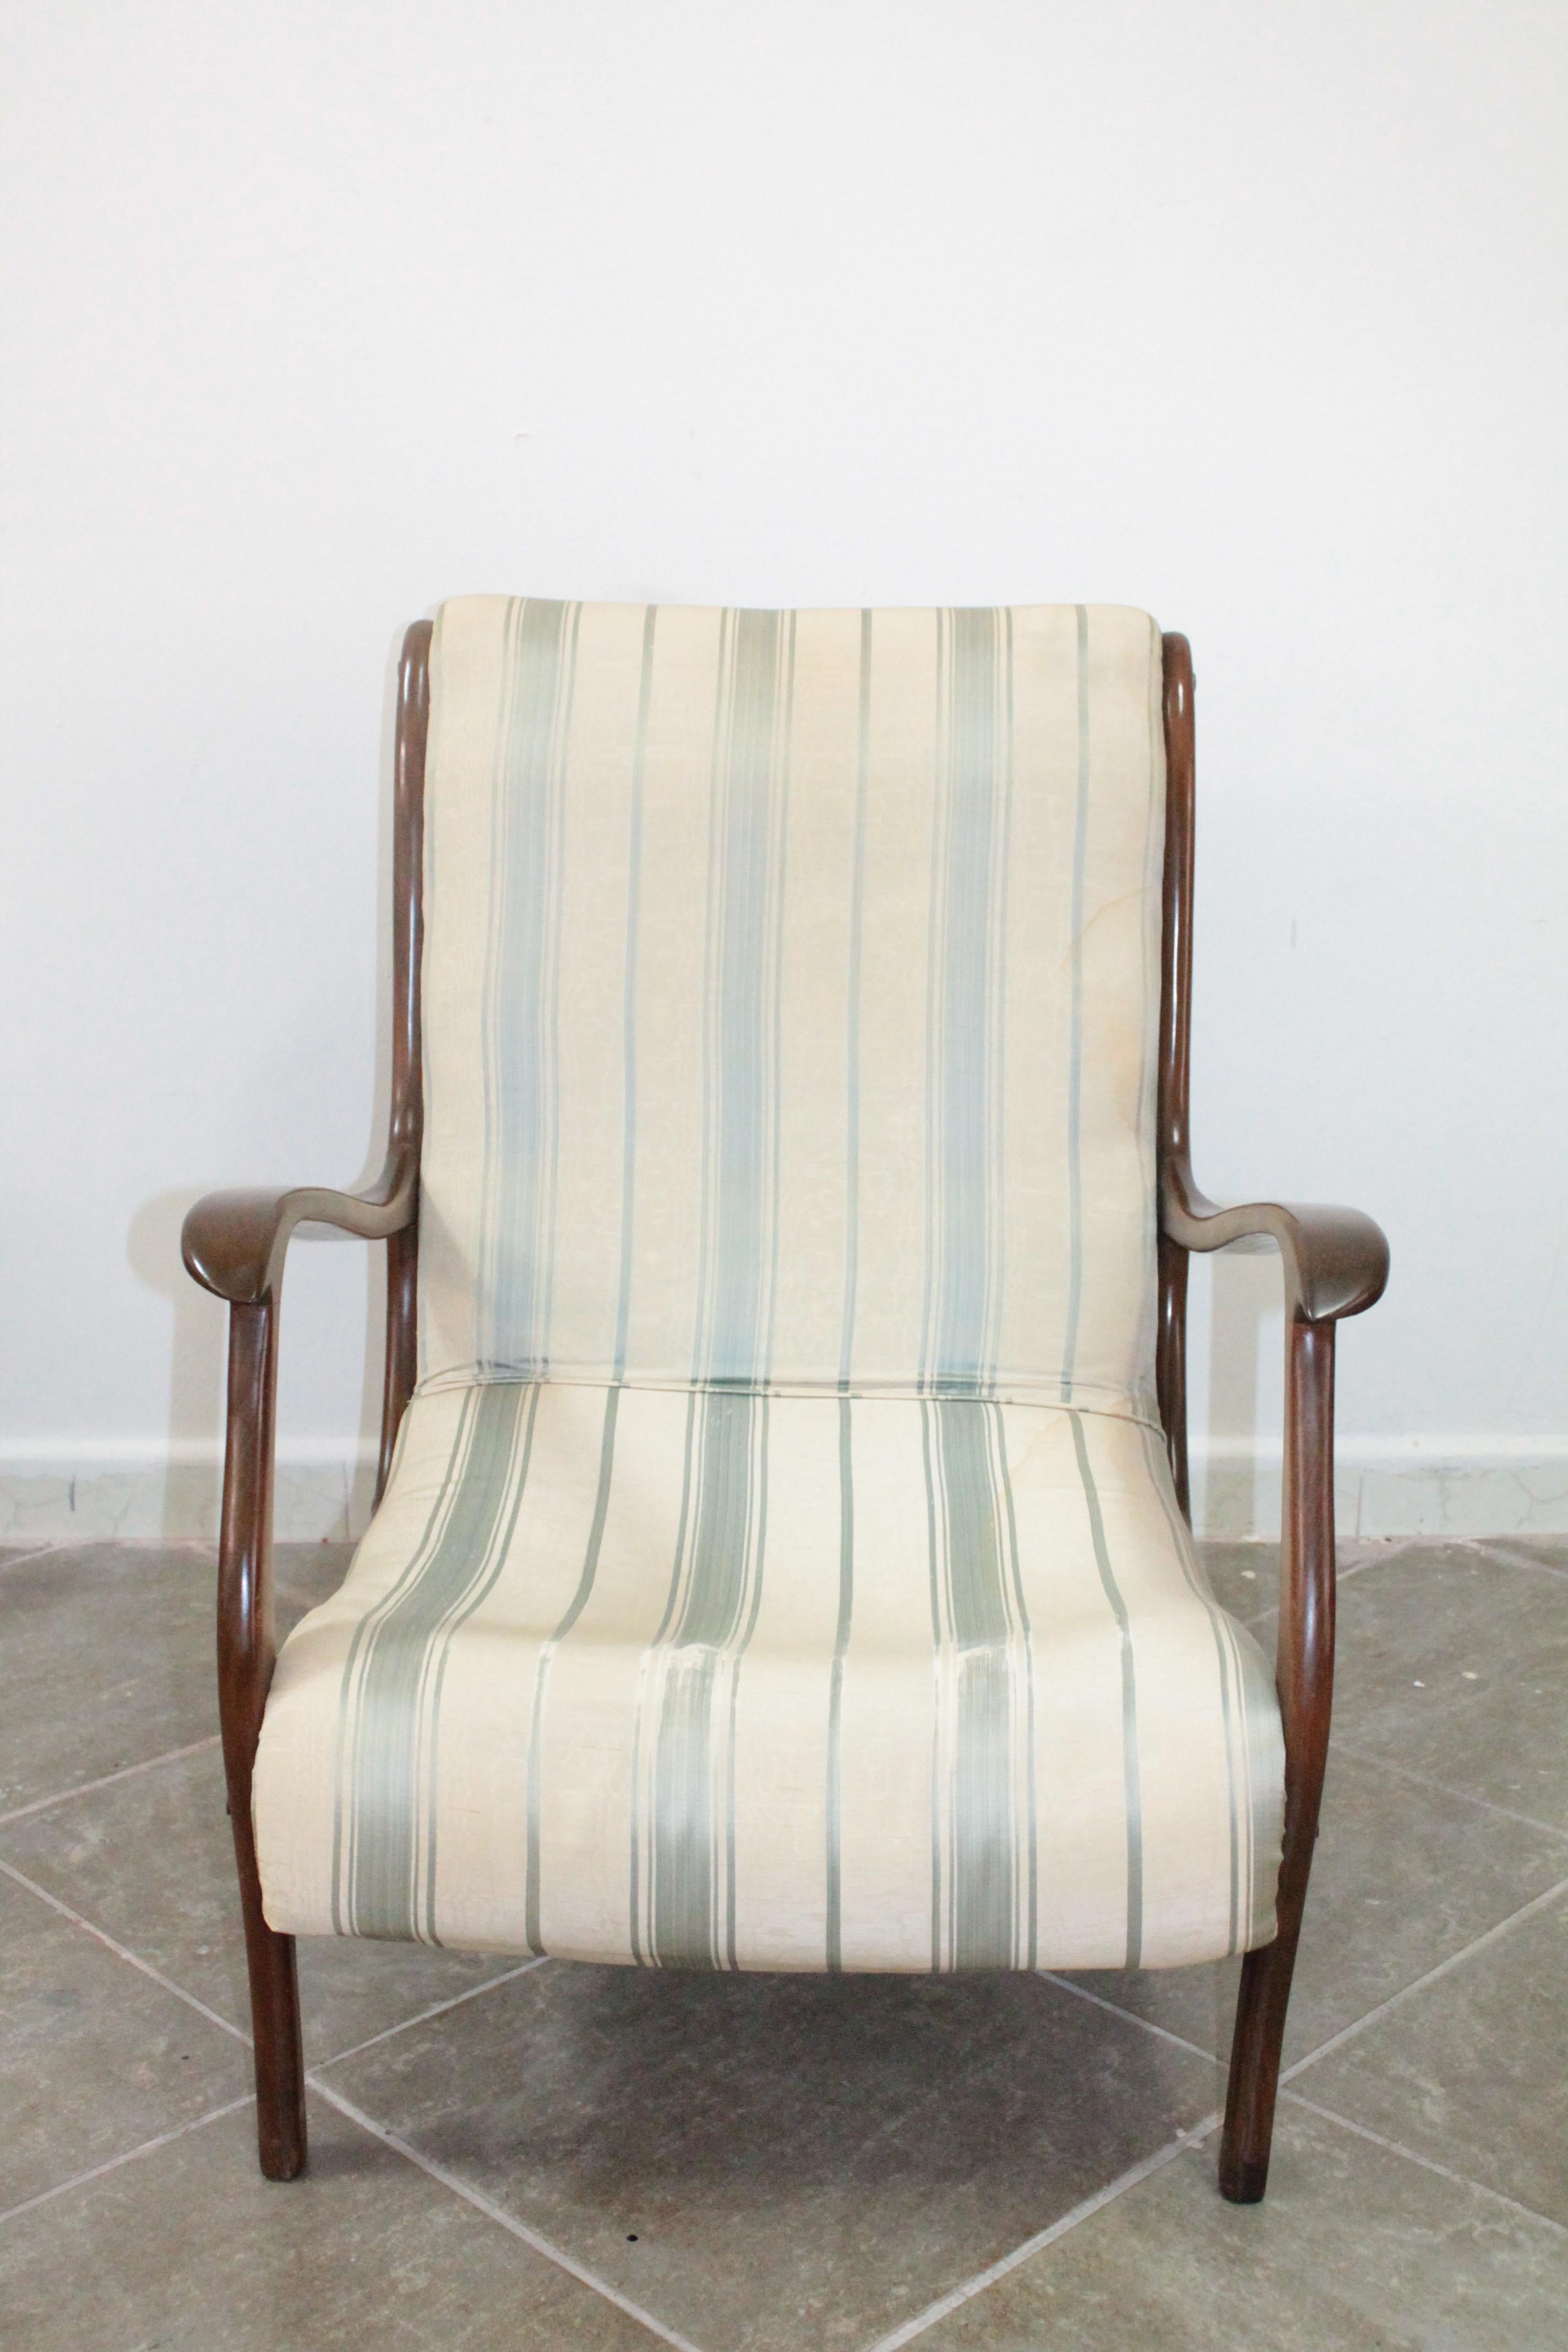 Vintage Ezio Longhi for Elam Lounge Chairs Wood, 1950s For Sale 3